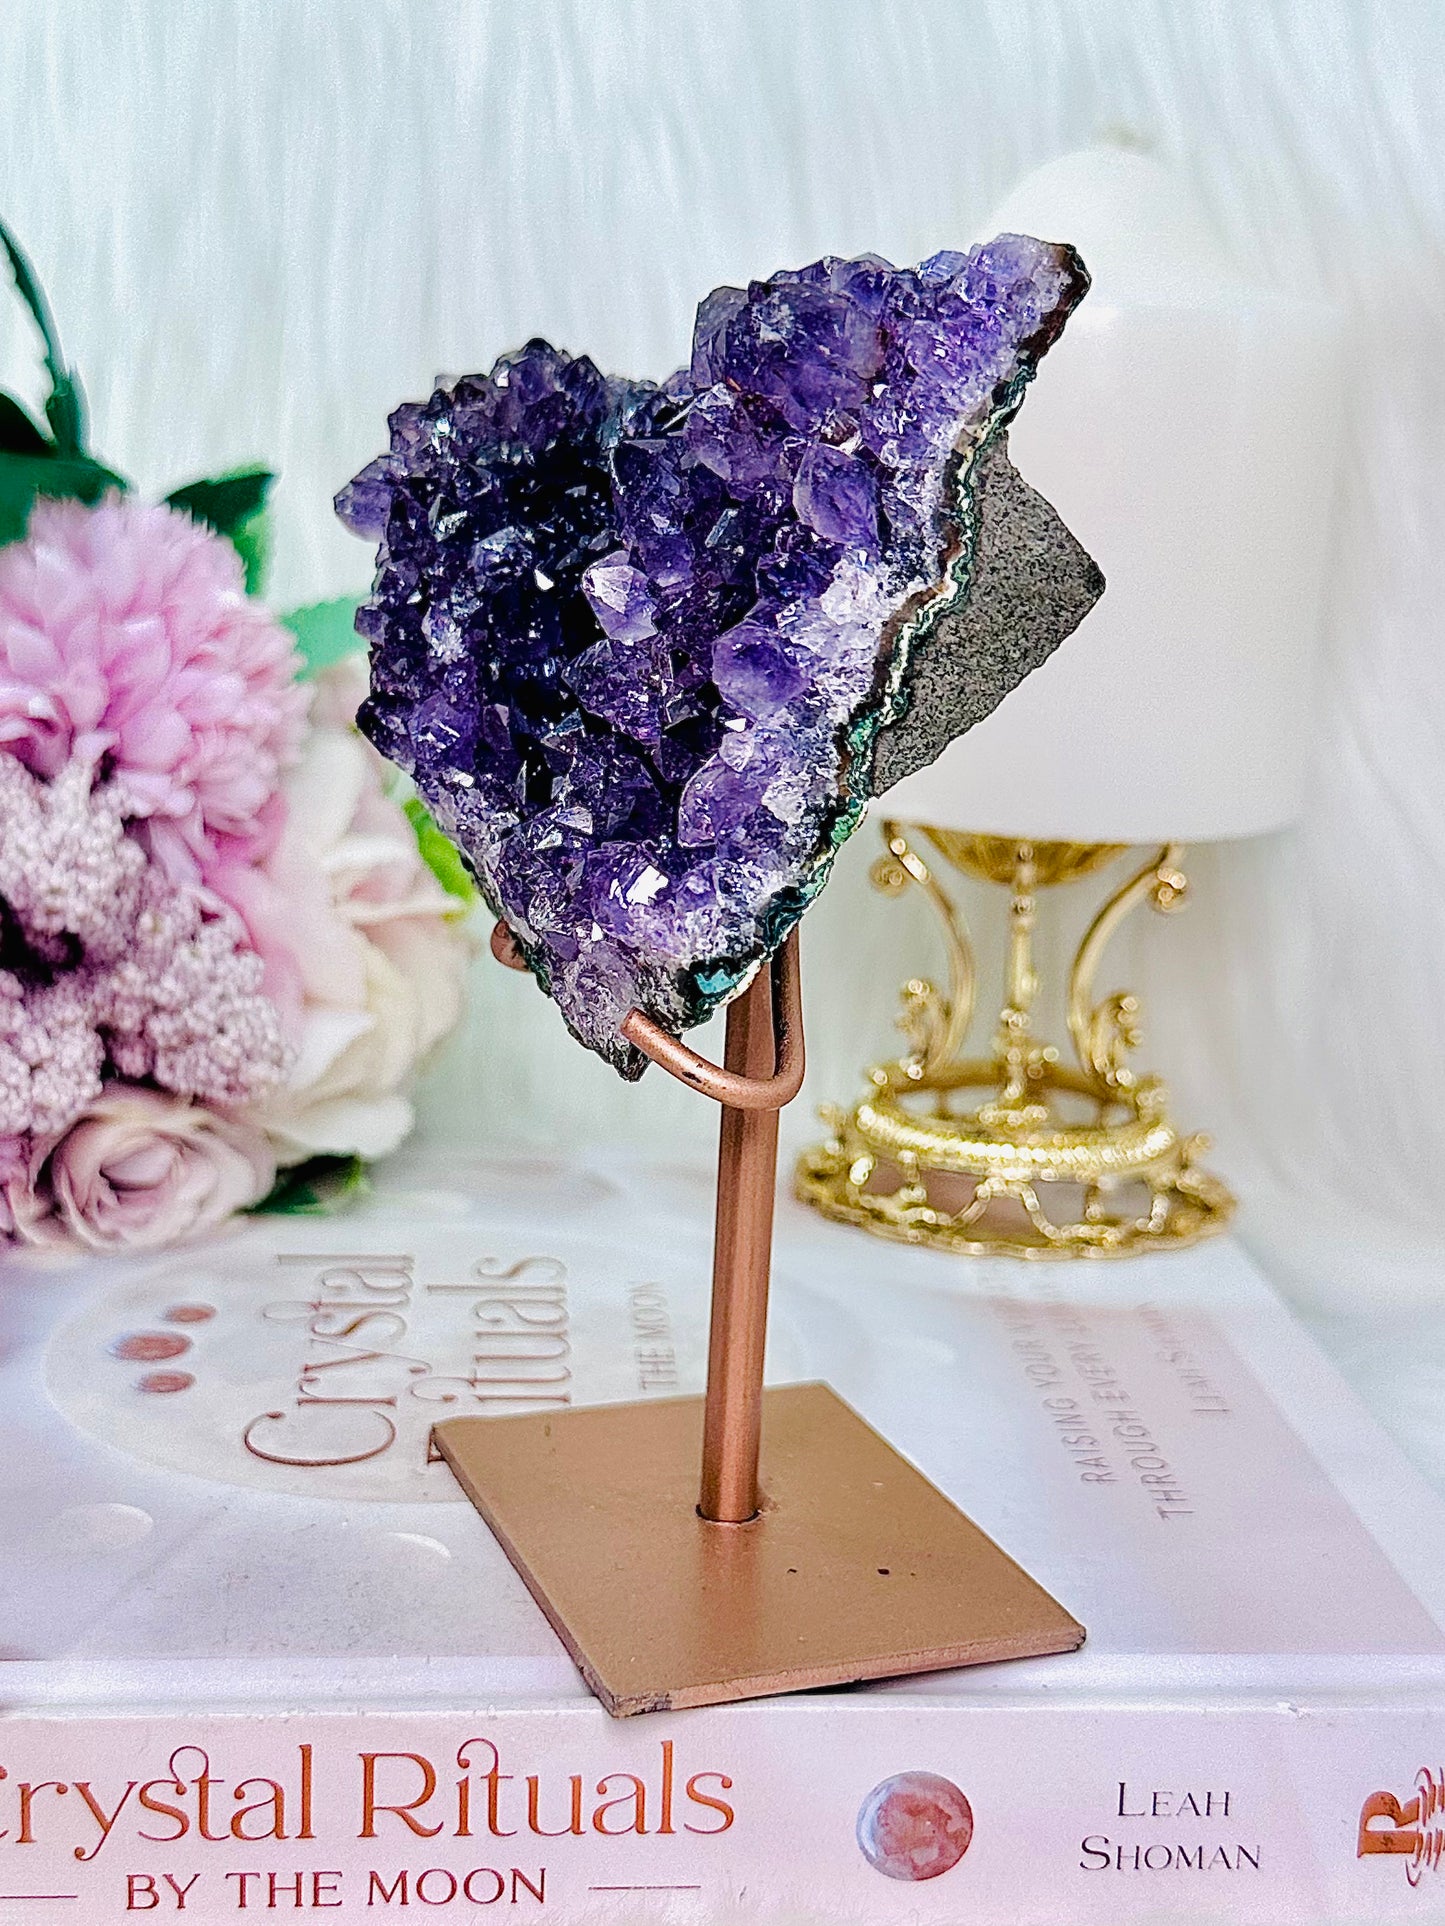 The Most Beautiful High Grade Deep Purple Amethyst Natural Cluster On Rose Gold Stand From Brazil 448grams